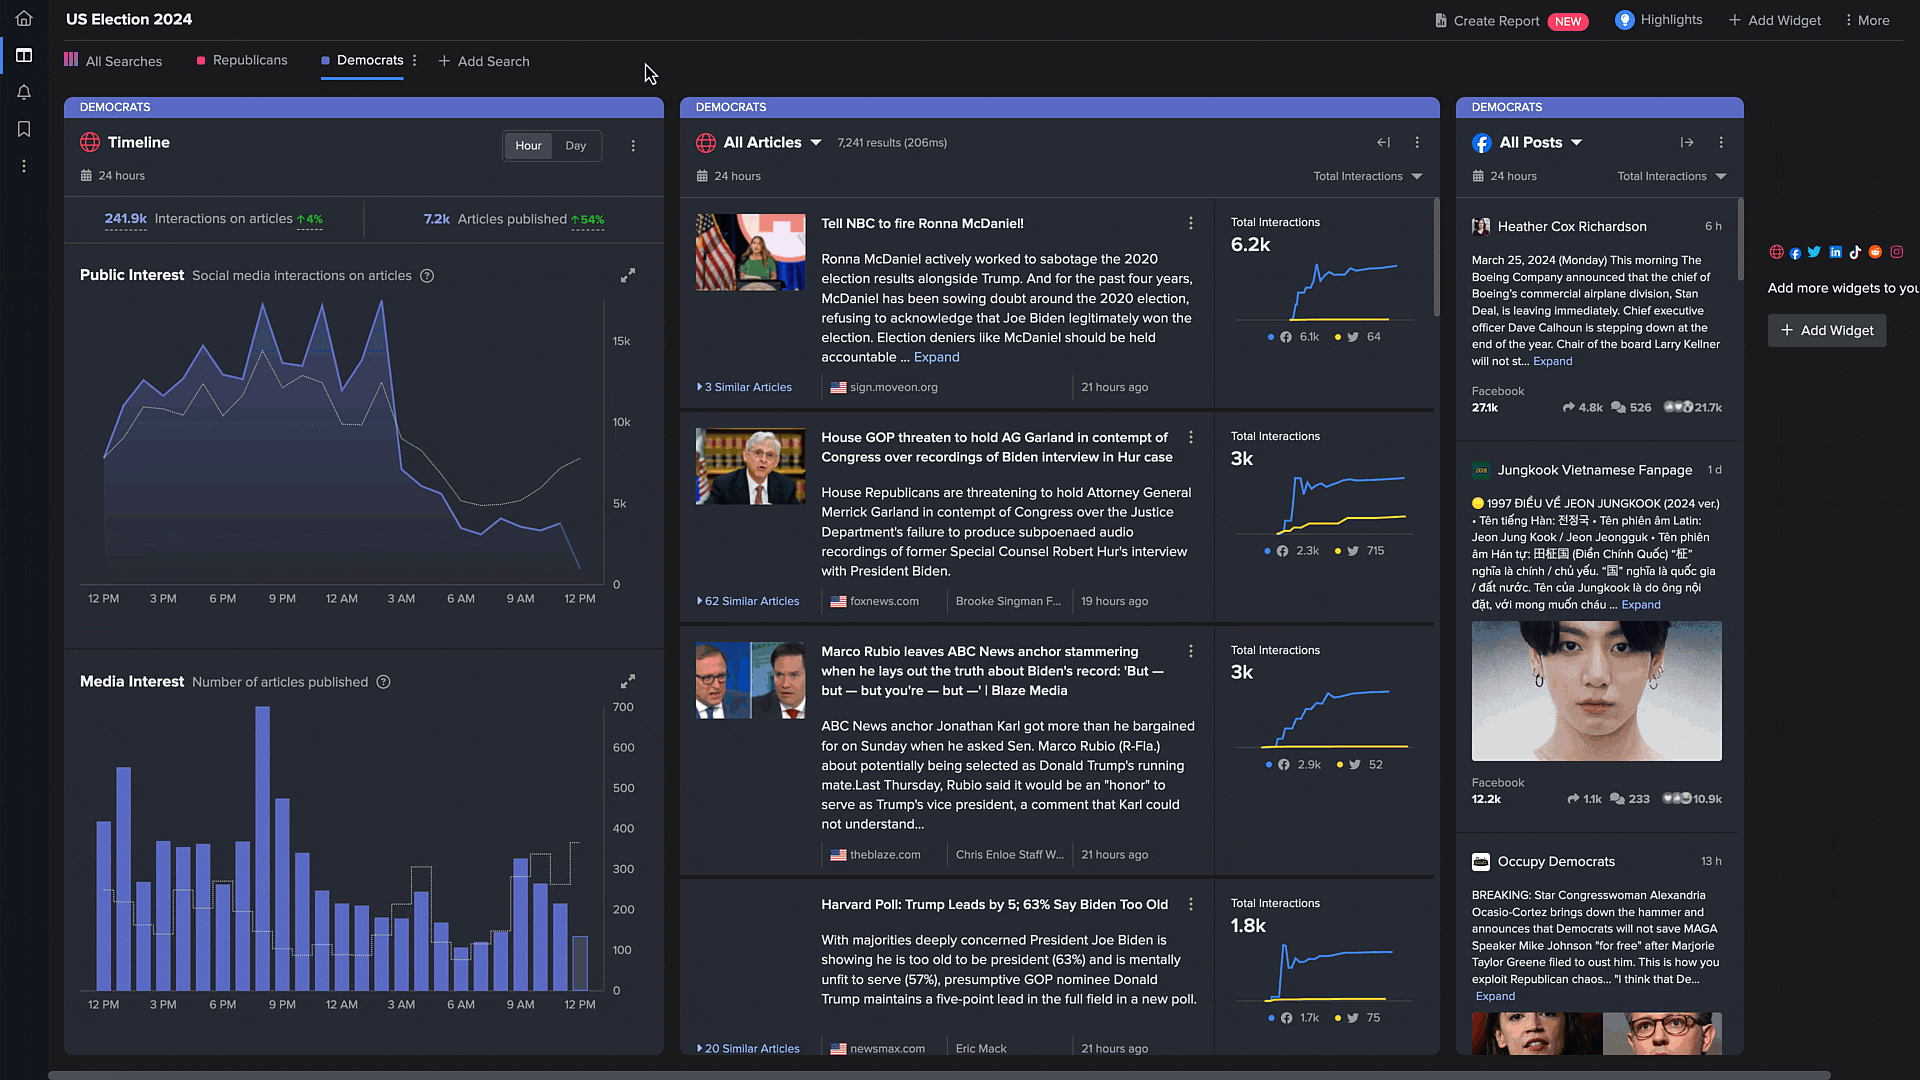 GIf showcasing change in interest in NewsWhip